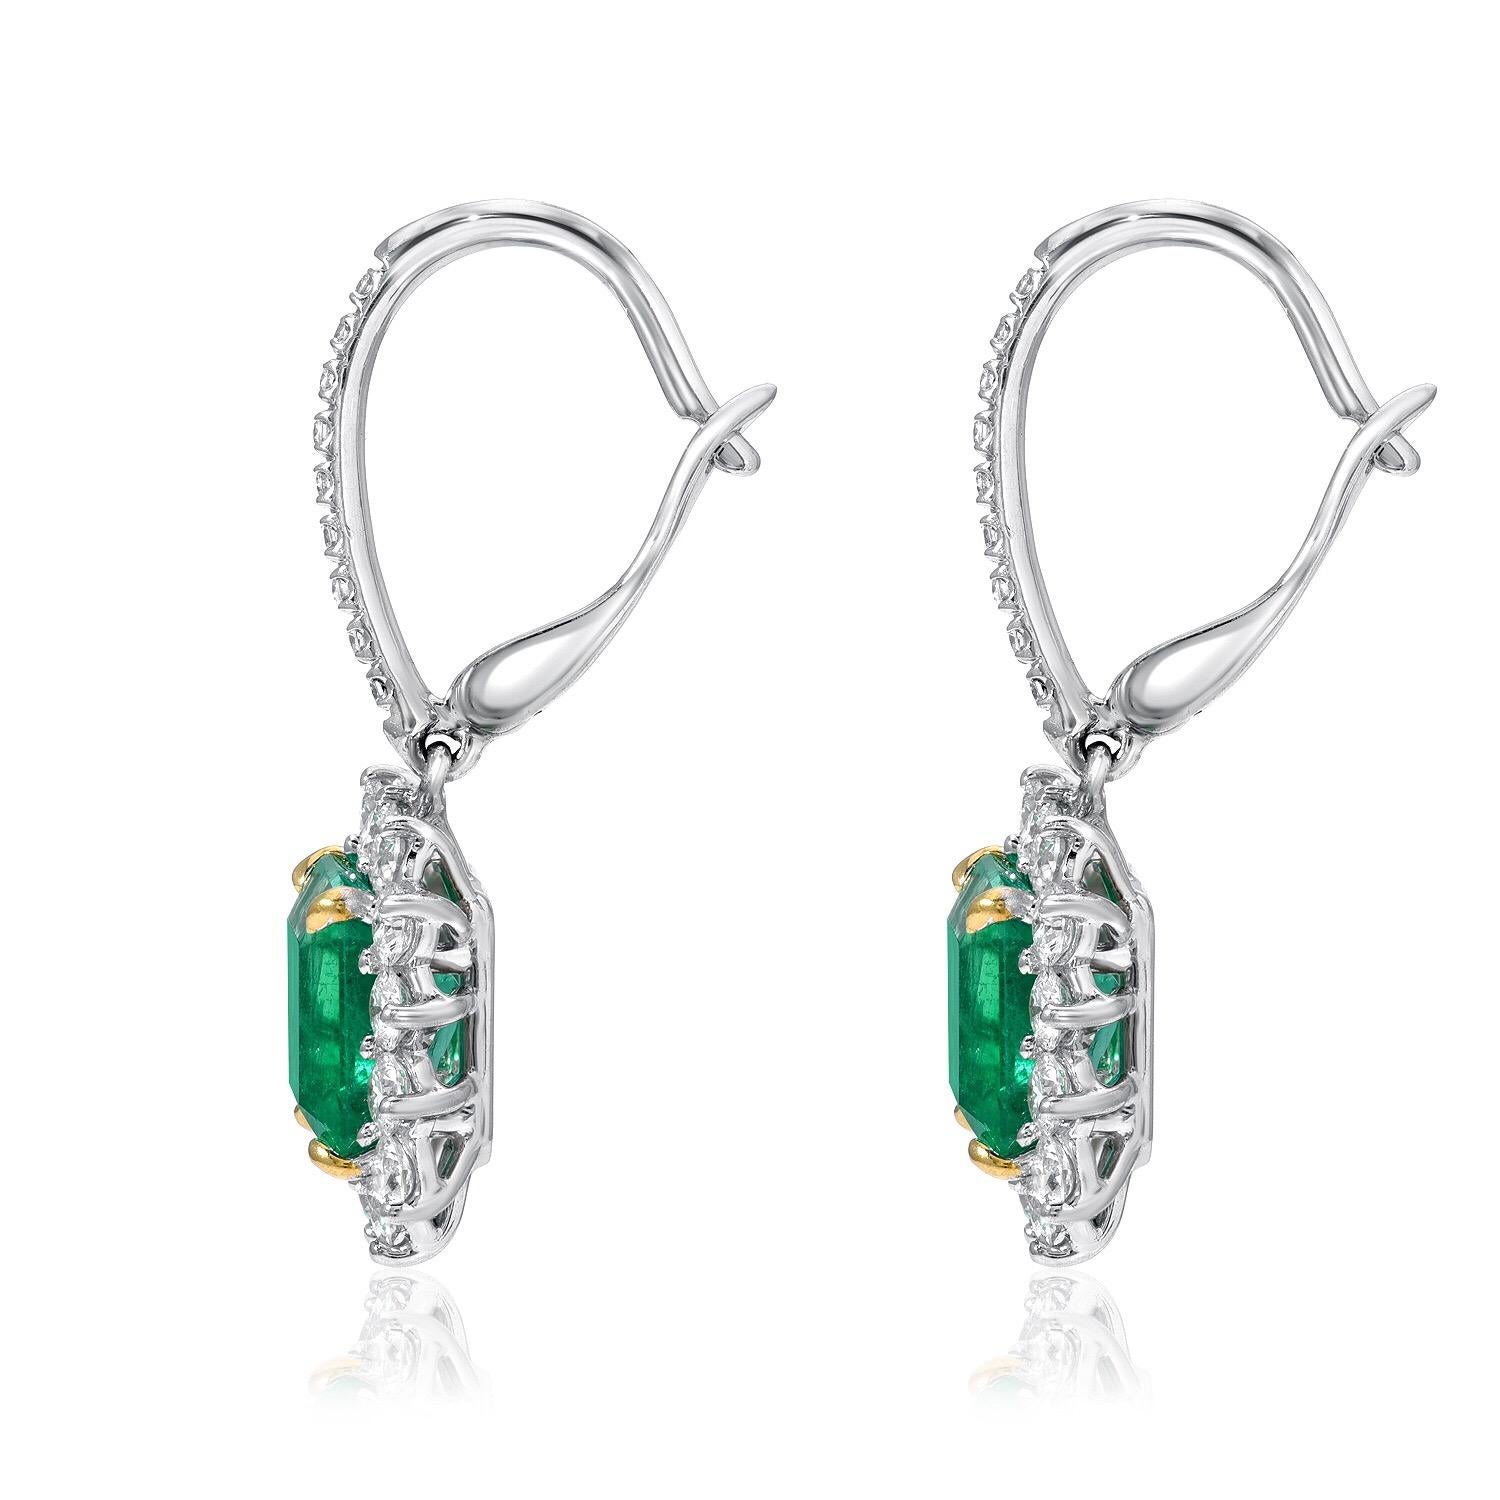 Emerald cut Colombian Emerald, lever-back earrings, featuring a pair of 2.68 carats total Emeralds, and a total of 1.20 carats round brilliant diamonds, in 18K white and yellow gold.
Returns are accepted and paid by us within 7 days of